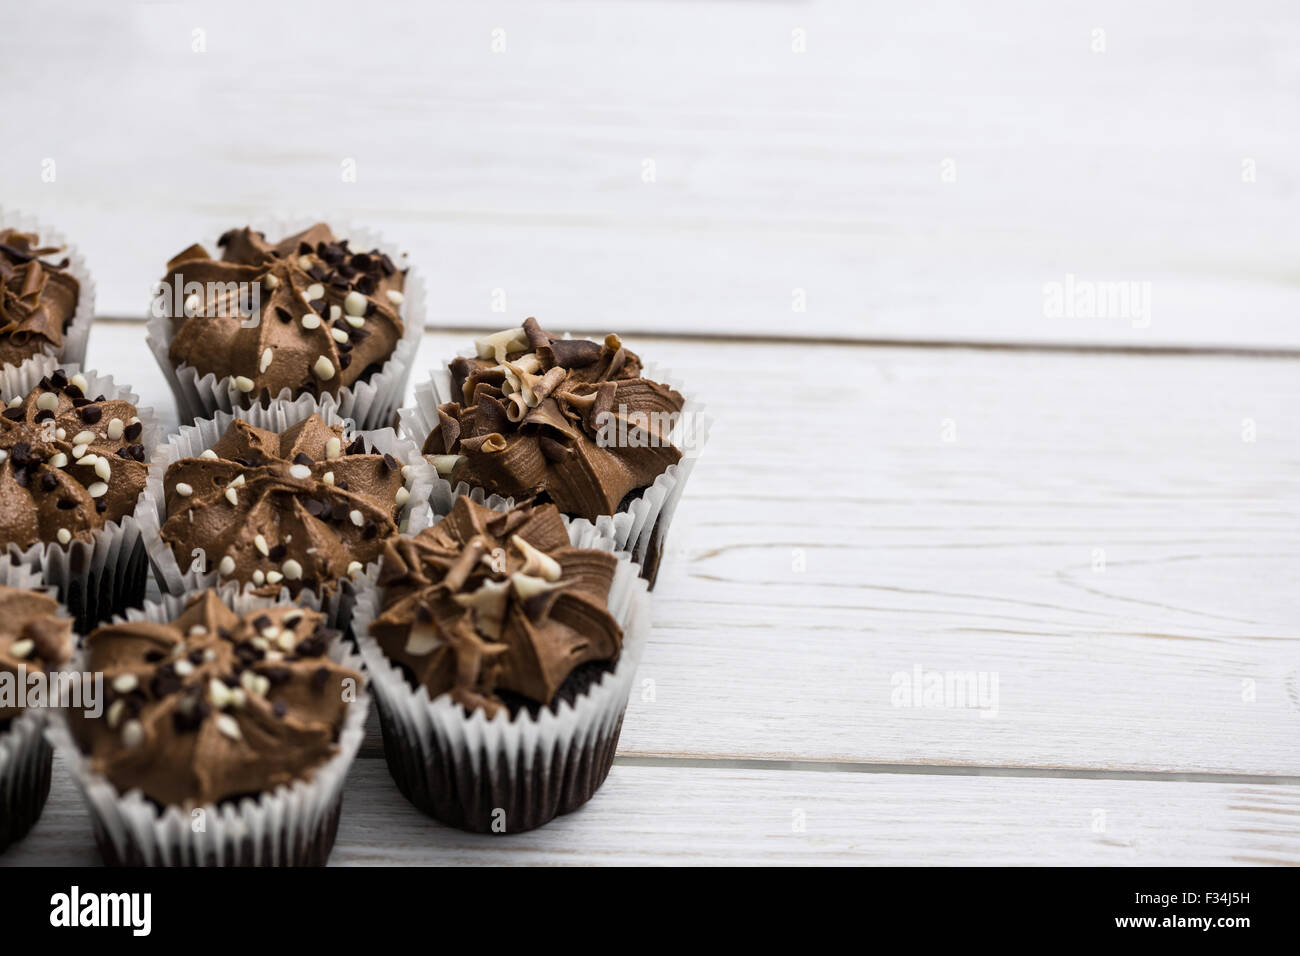 Chocolate cupcakes on a table Stock Photo